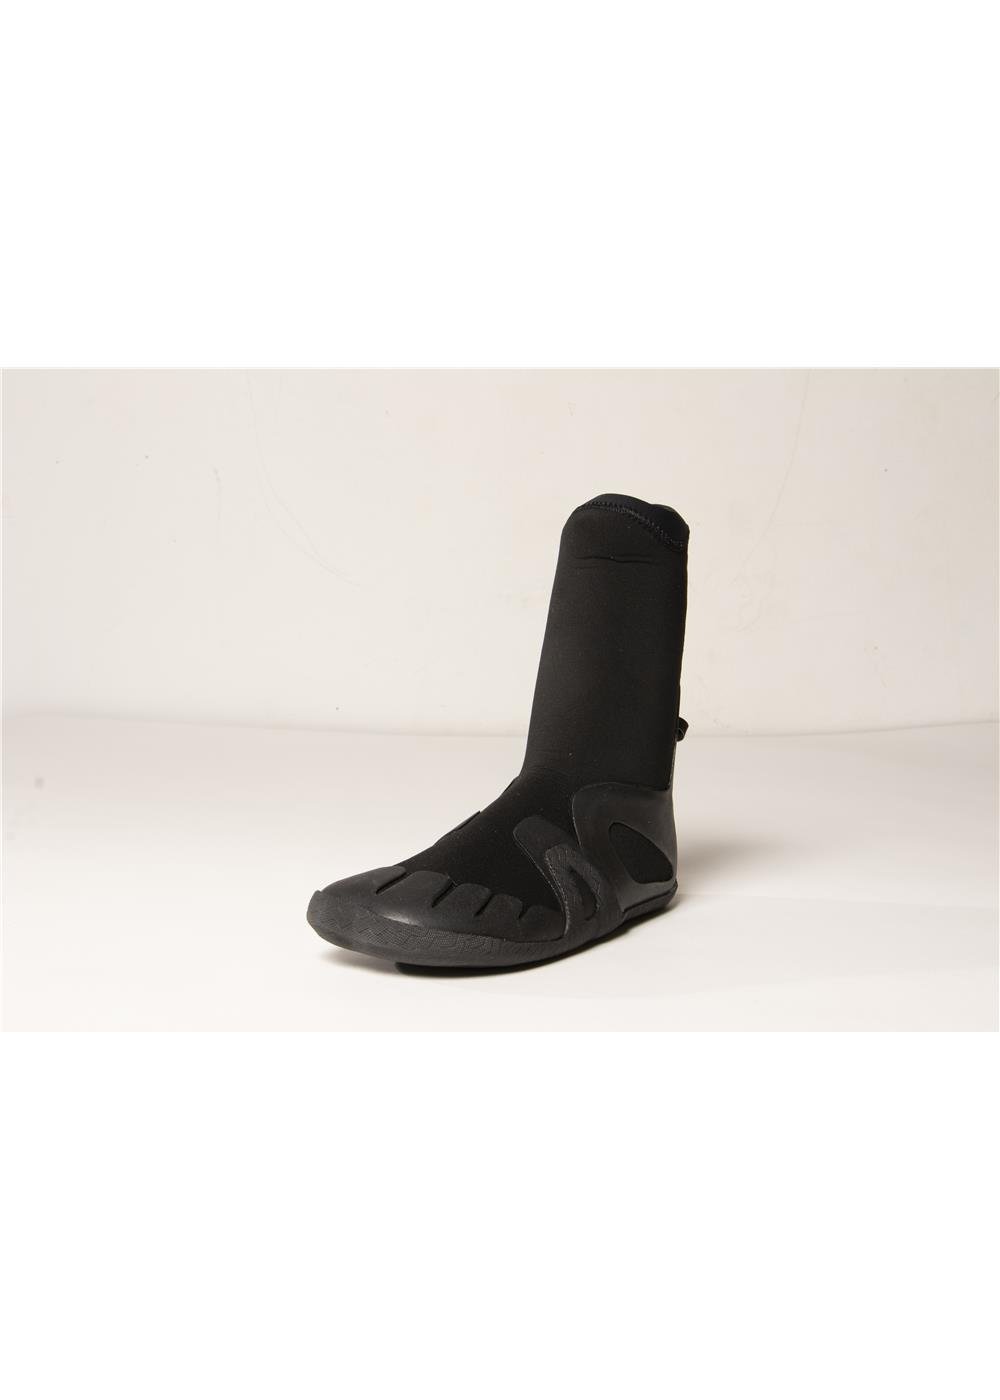 Girls 5mm Closed Toe Wetsuit Bootie.